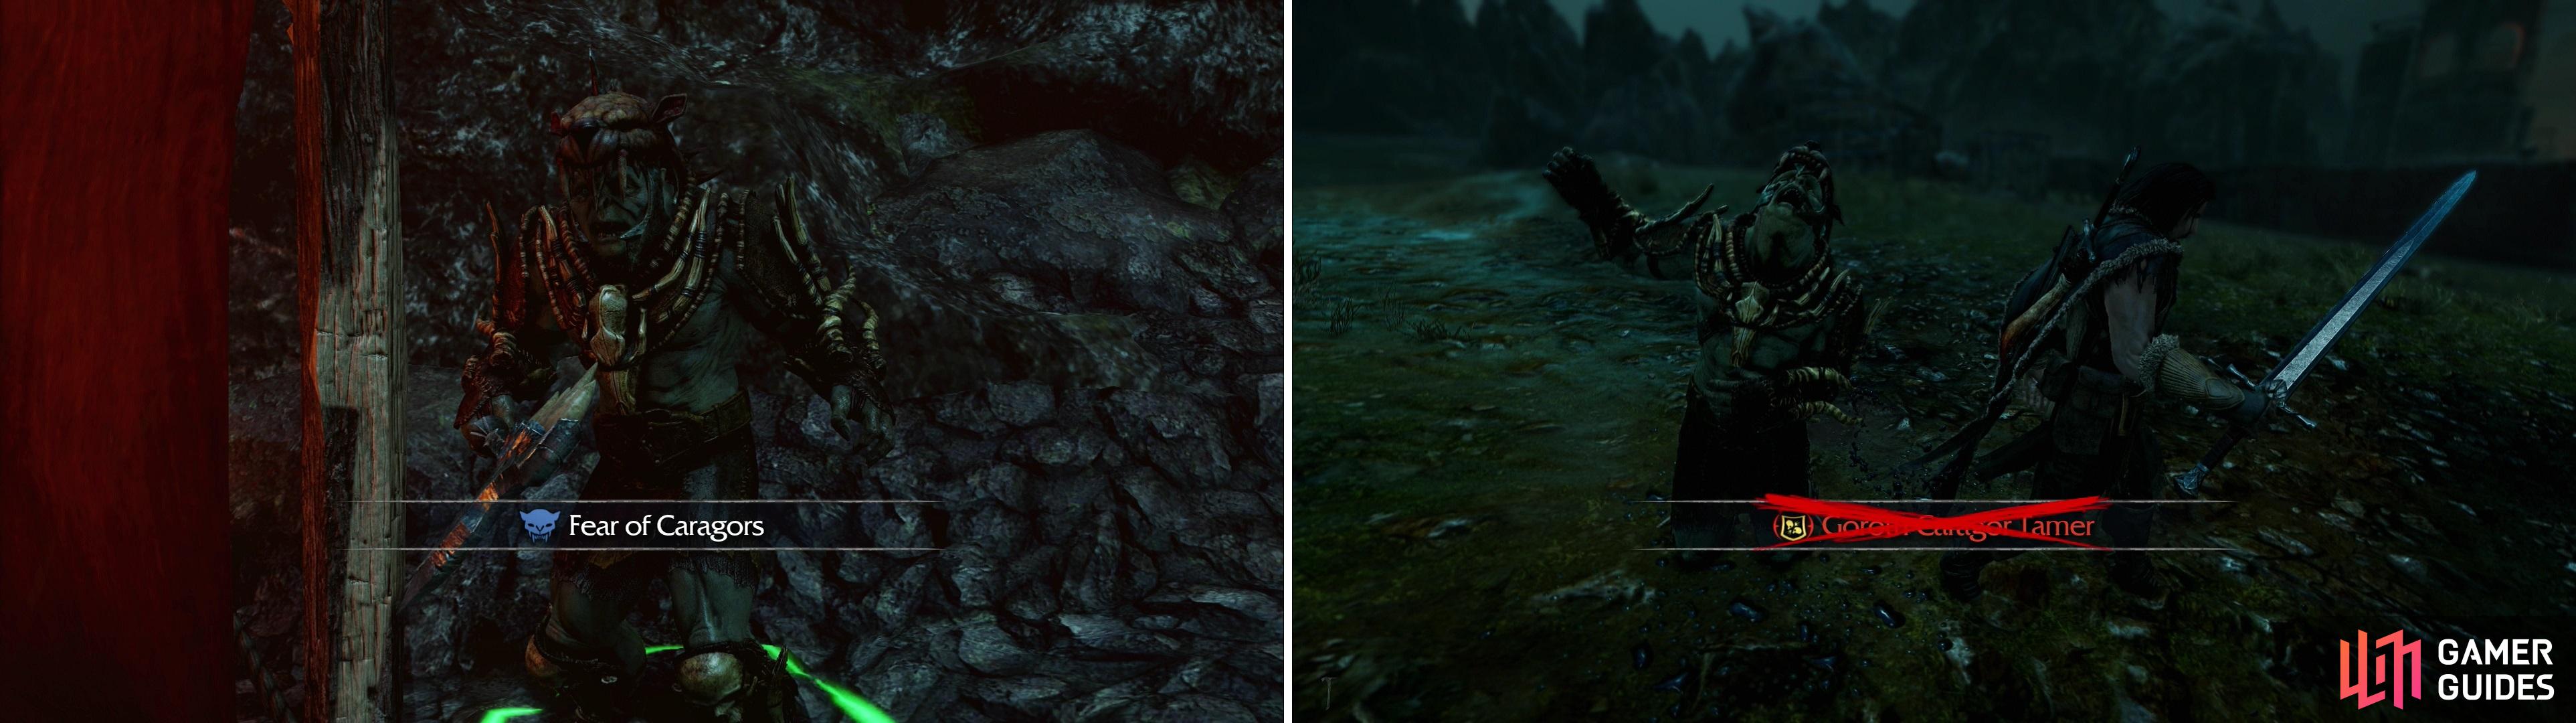 Release a caged Caragor to take advantage of Goroth’s fear of them (left), after which he should be easy to dispatch (right).